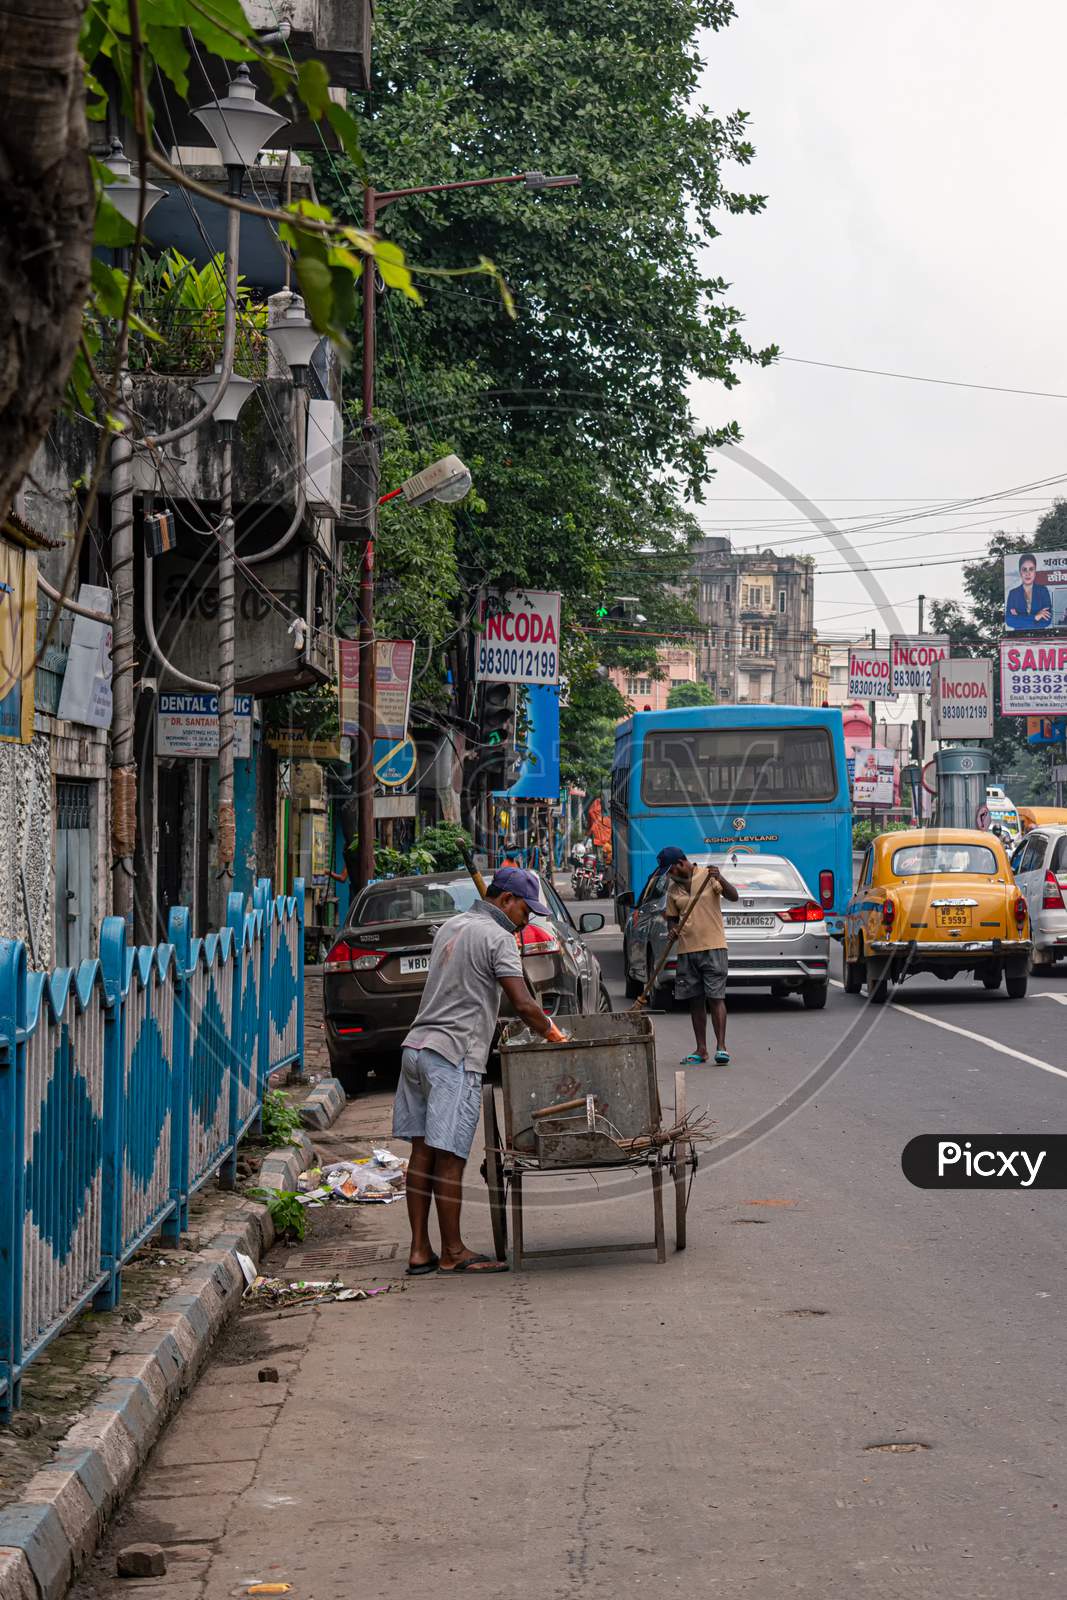 A Sweeper Sweeps The Street Of Kolkata, India On October 2020